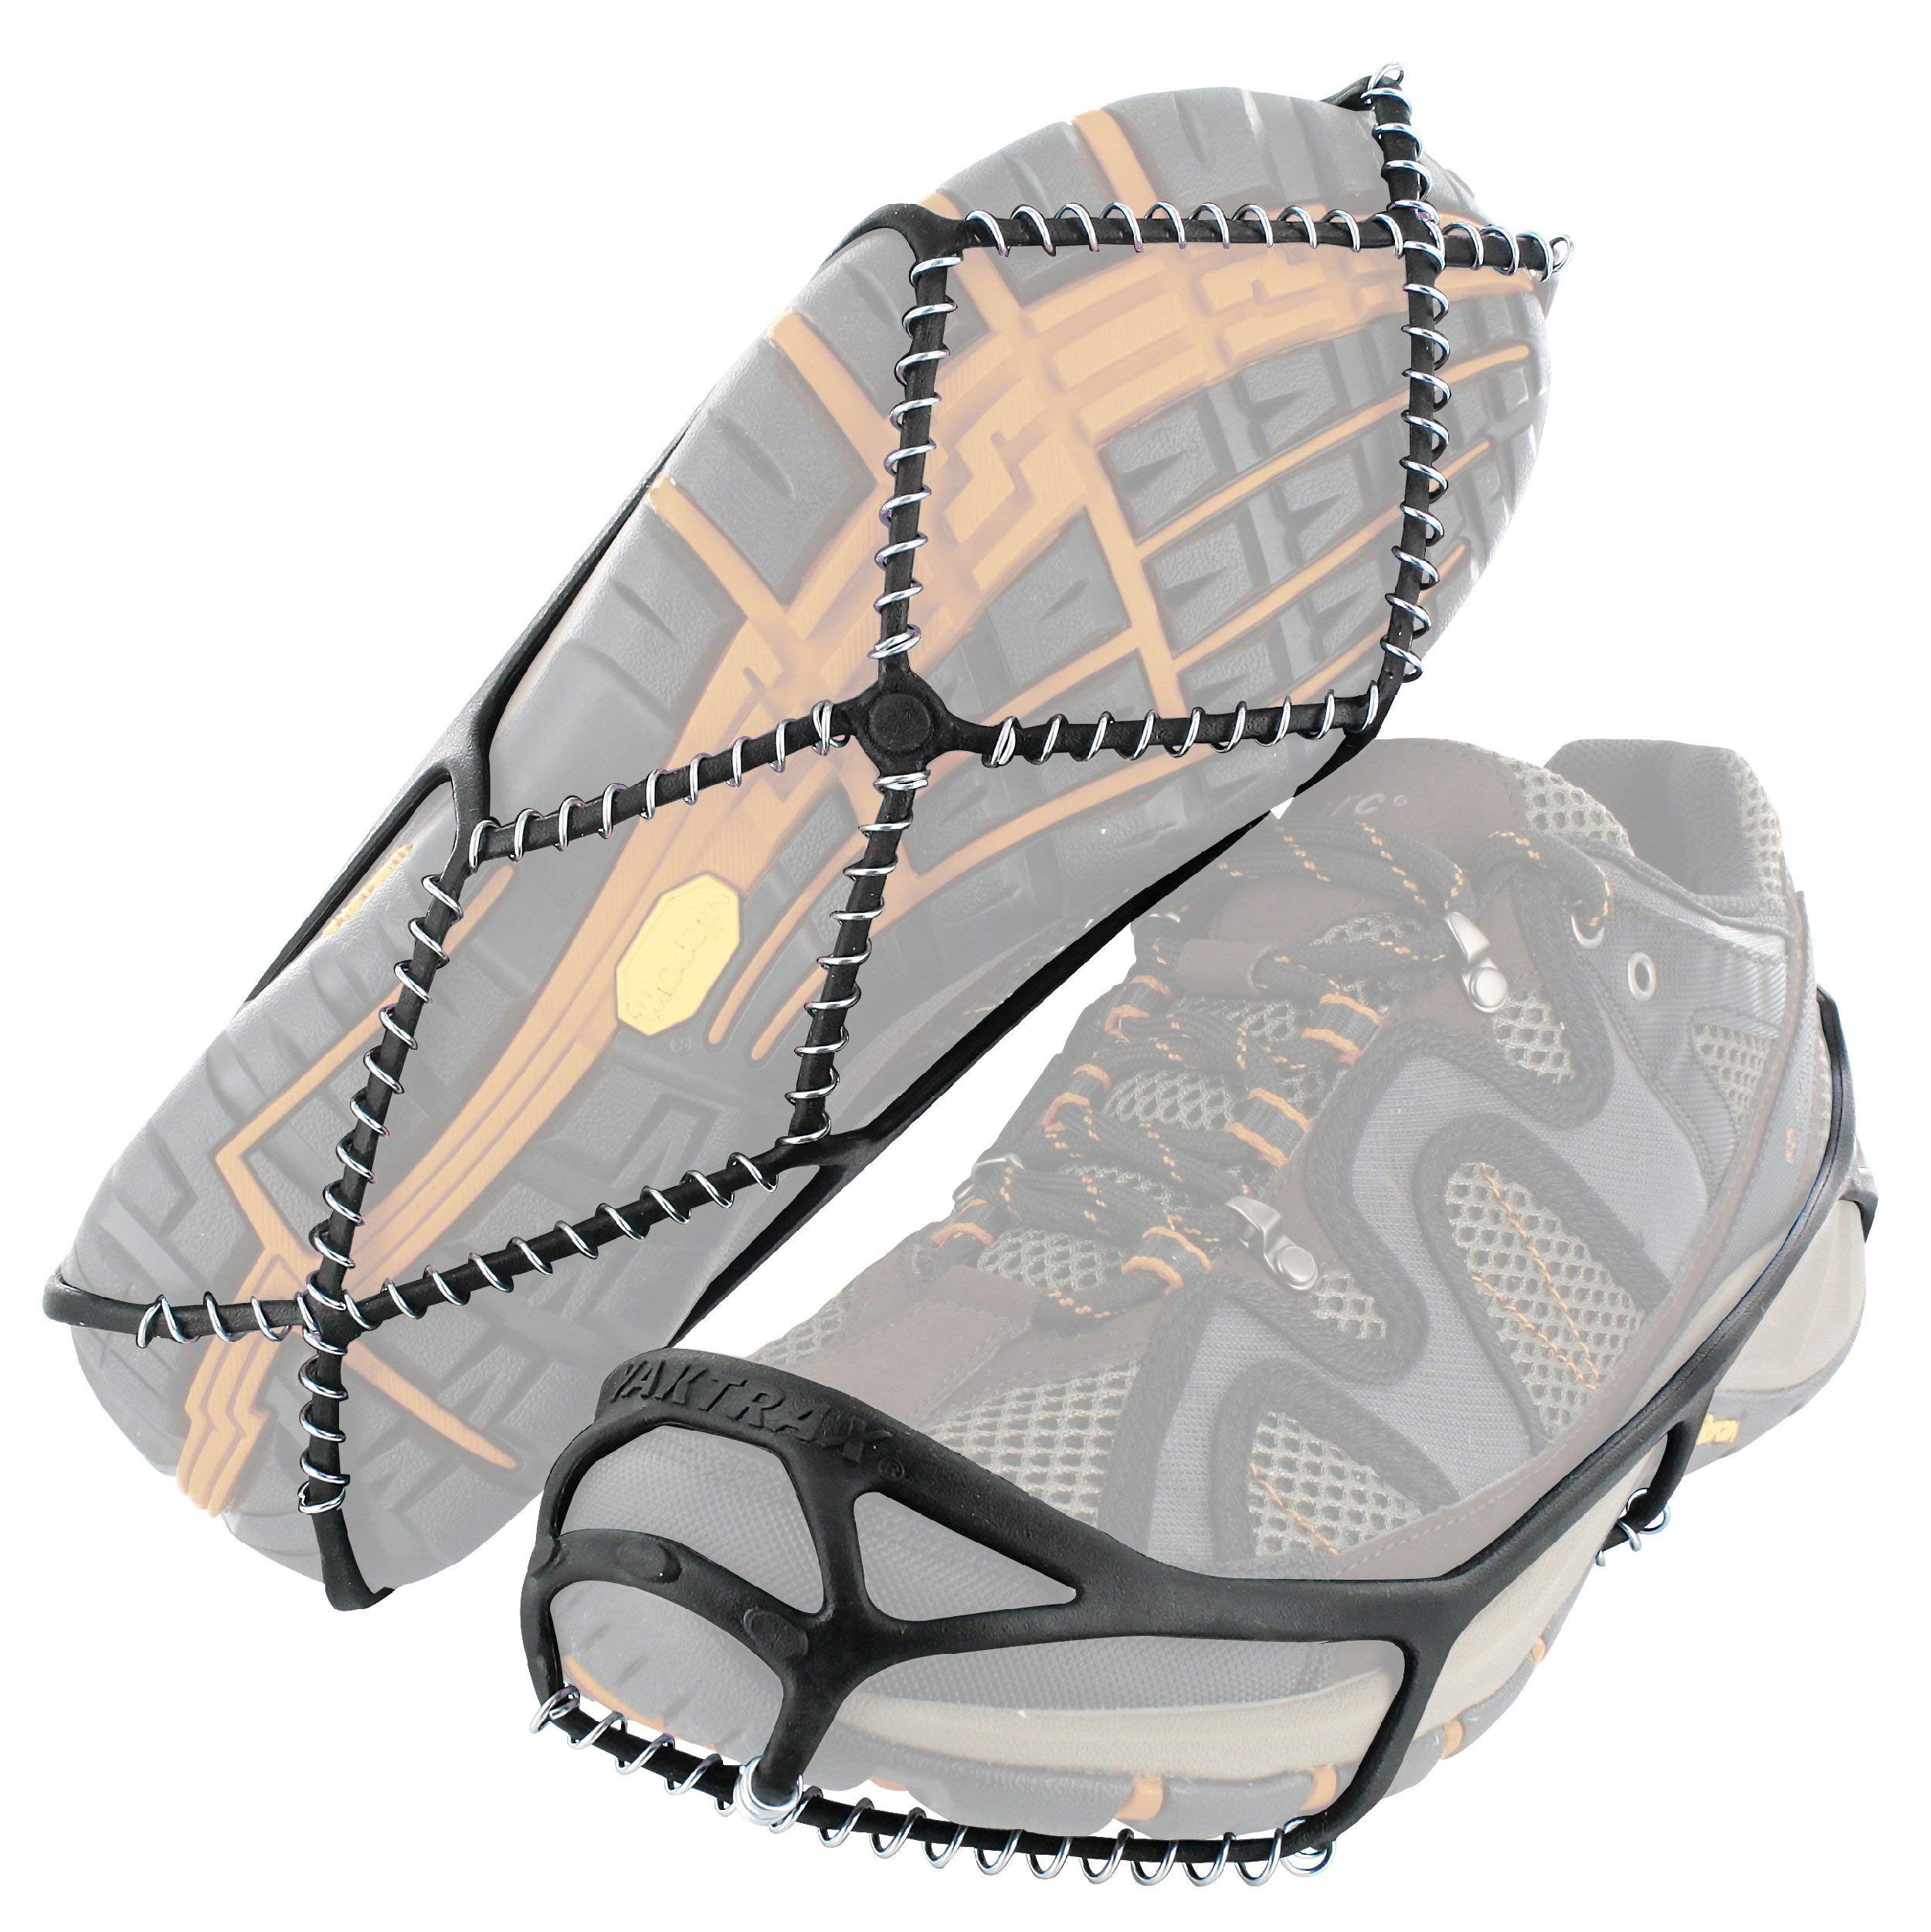 Yaktrax Hiking and Walking Traction Cleats for Snow, Ice, and Rock